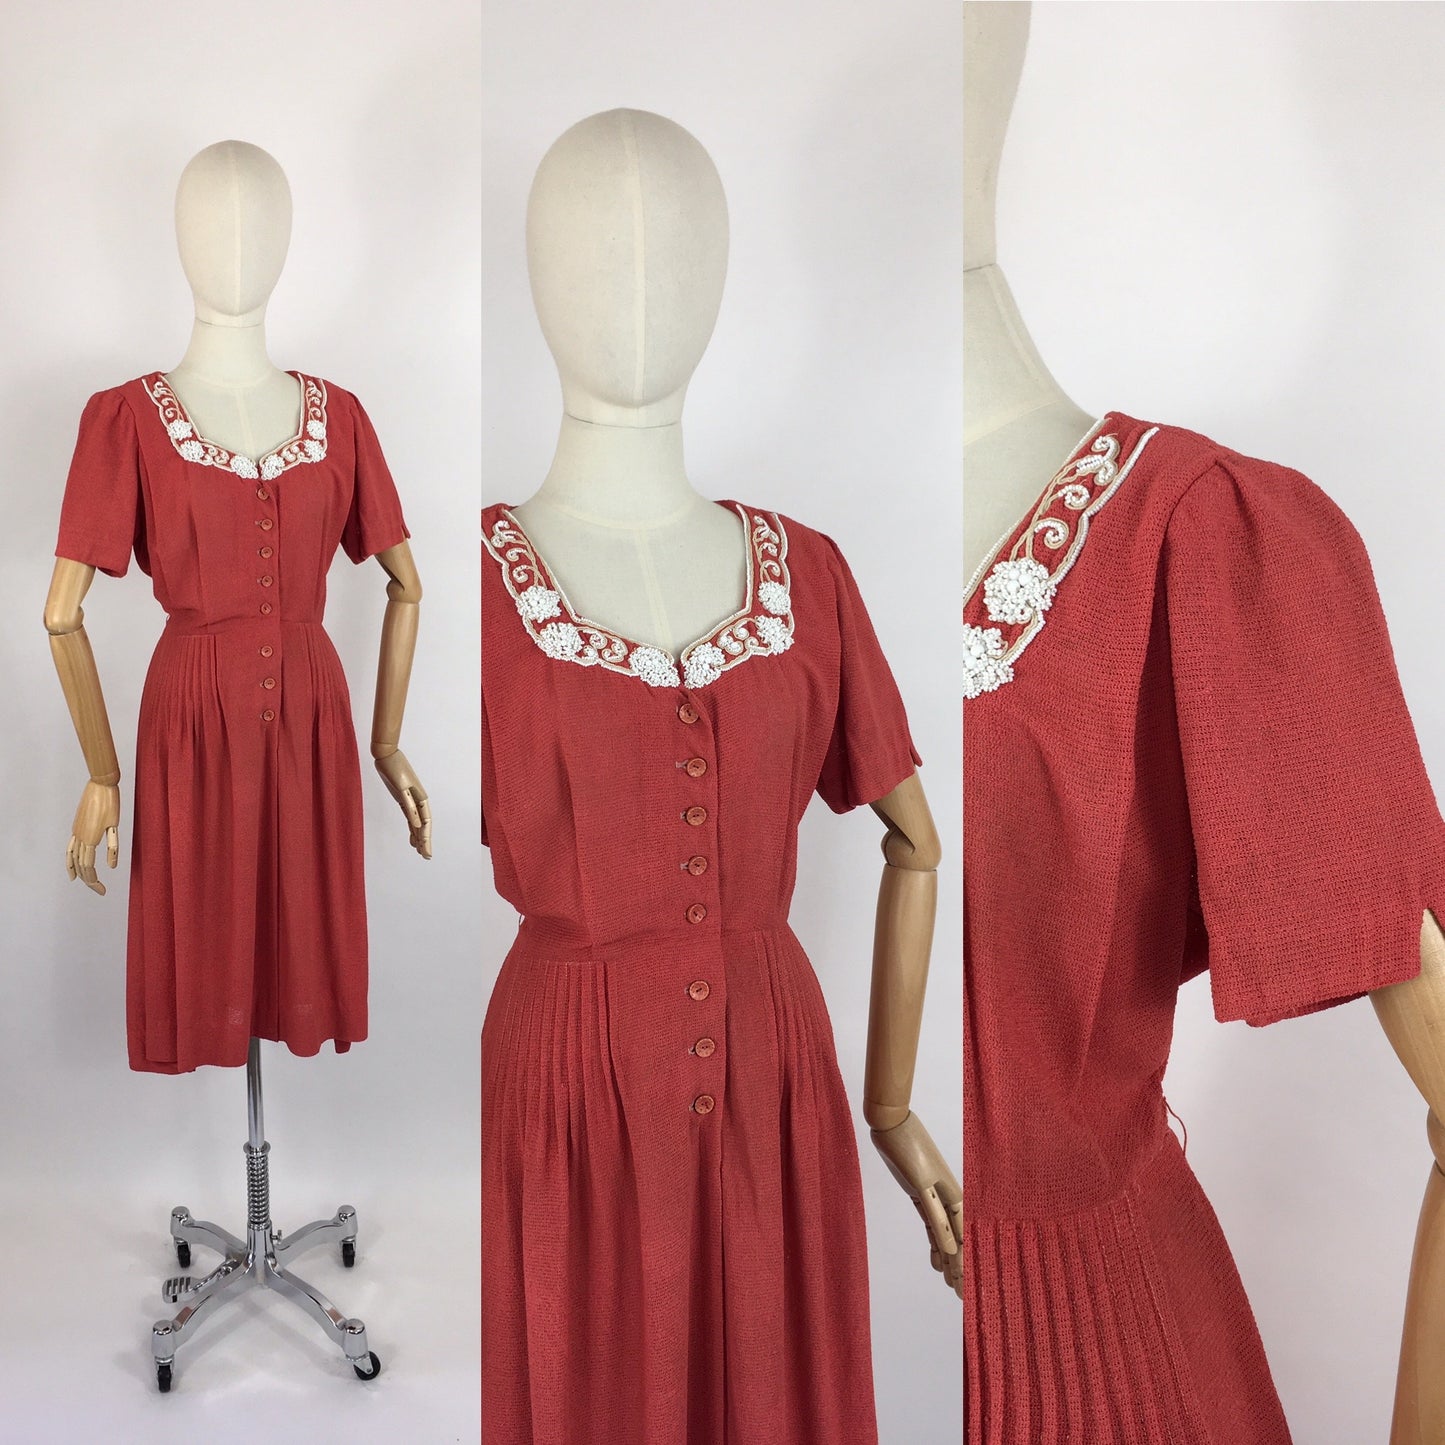 Original 1940’s Dress By ‘ Travelcraft by Sportscraft’ - In a Beautiful Deep Coral with White Floral Beadwork